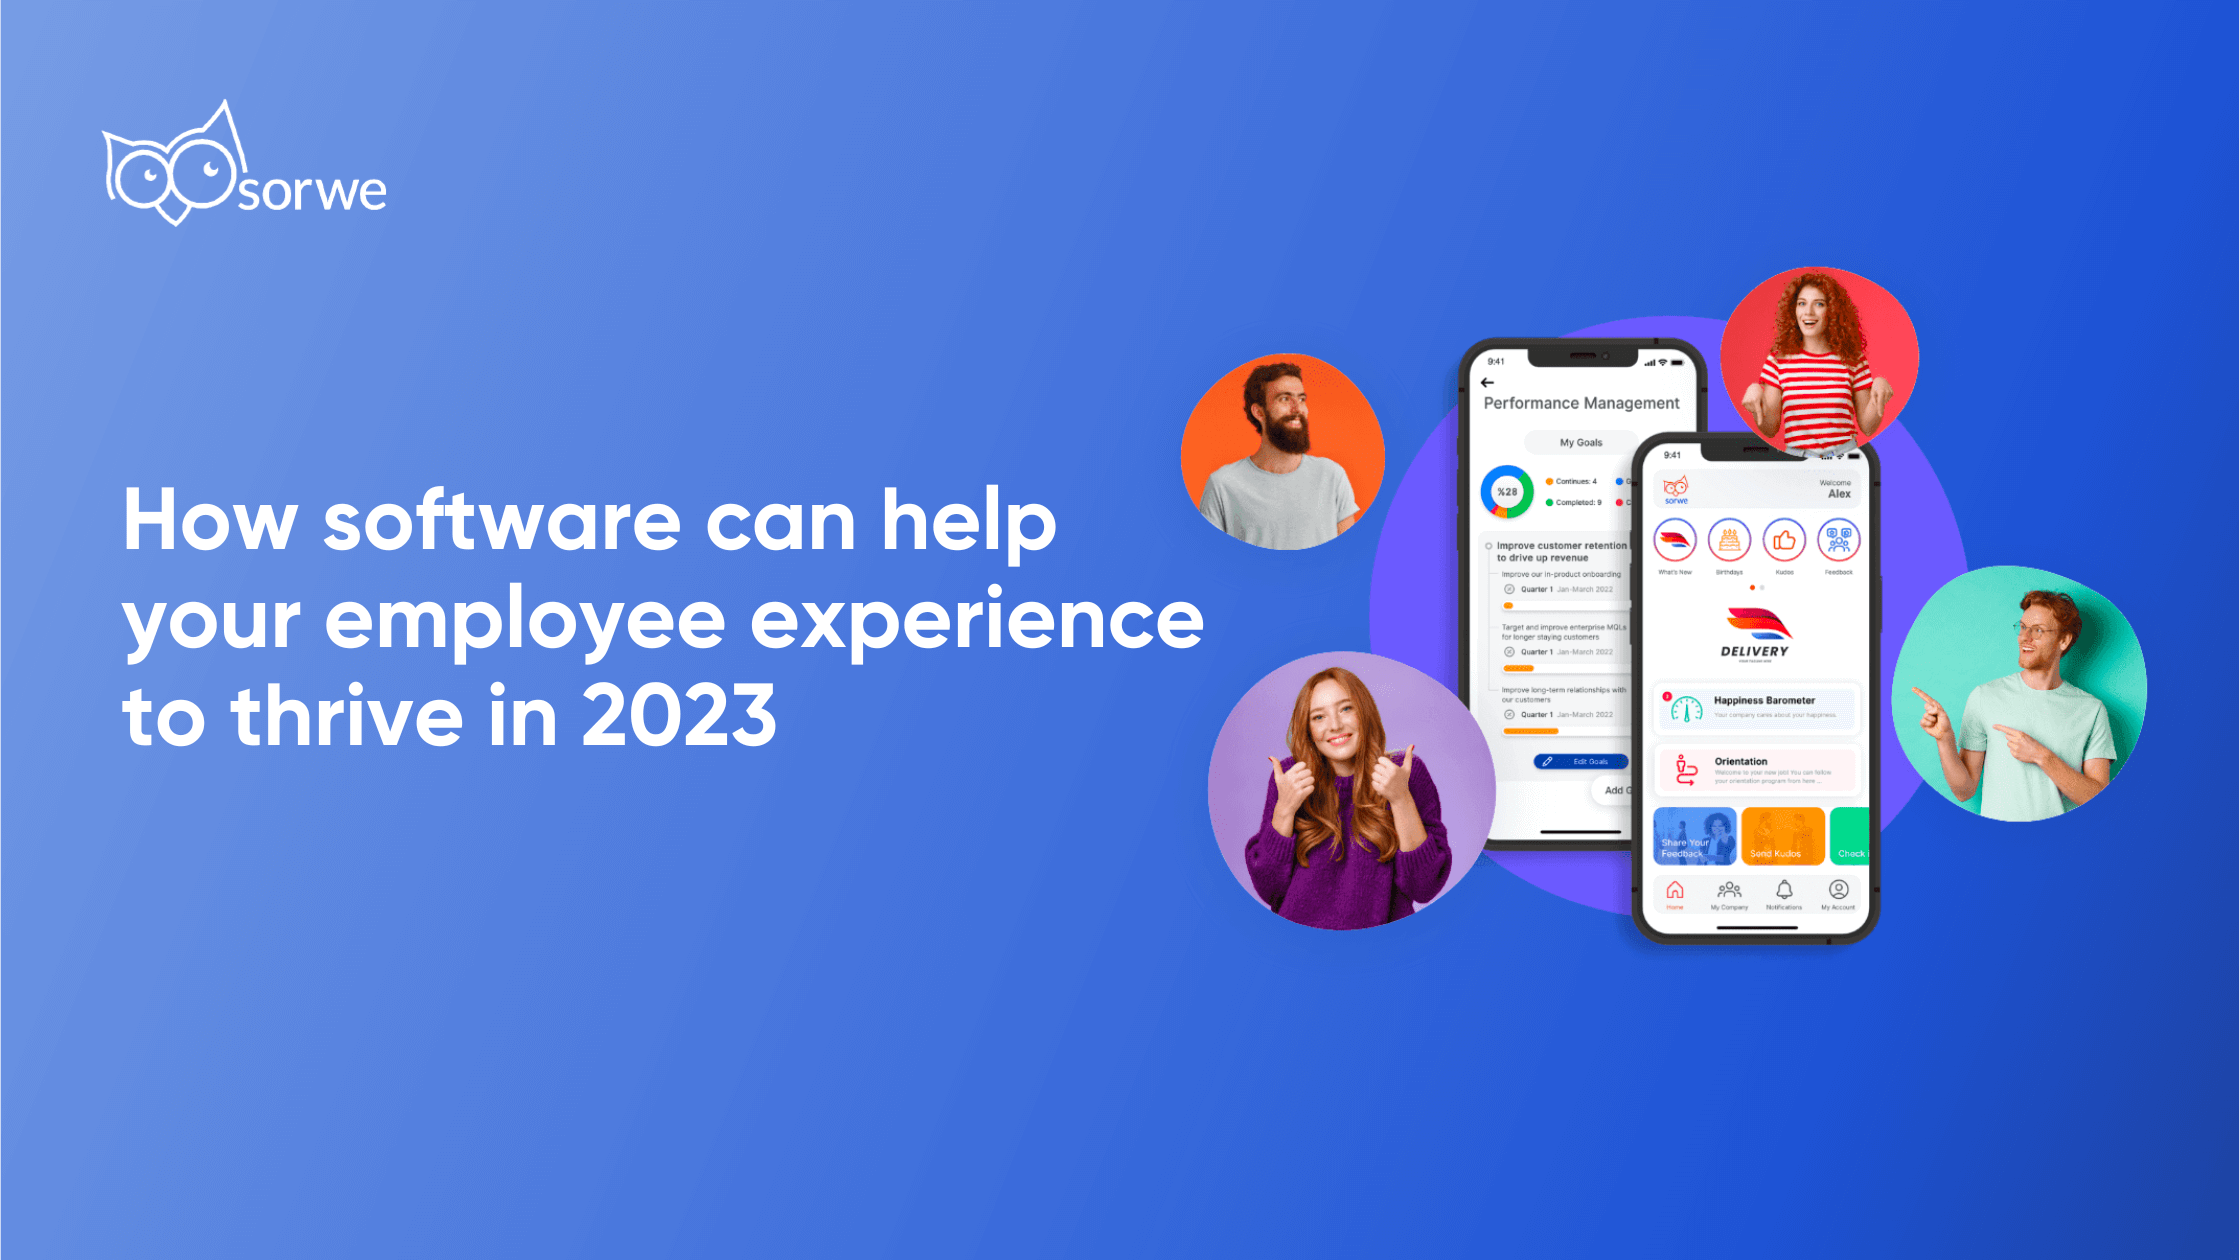 How software can help your employee experience to thrive in 2023